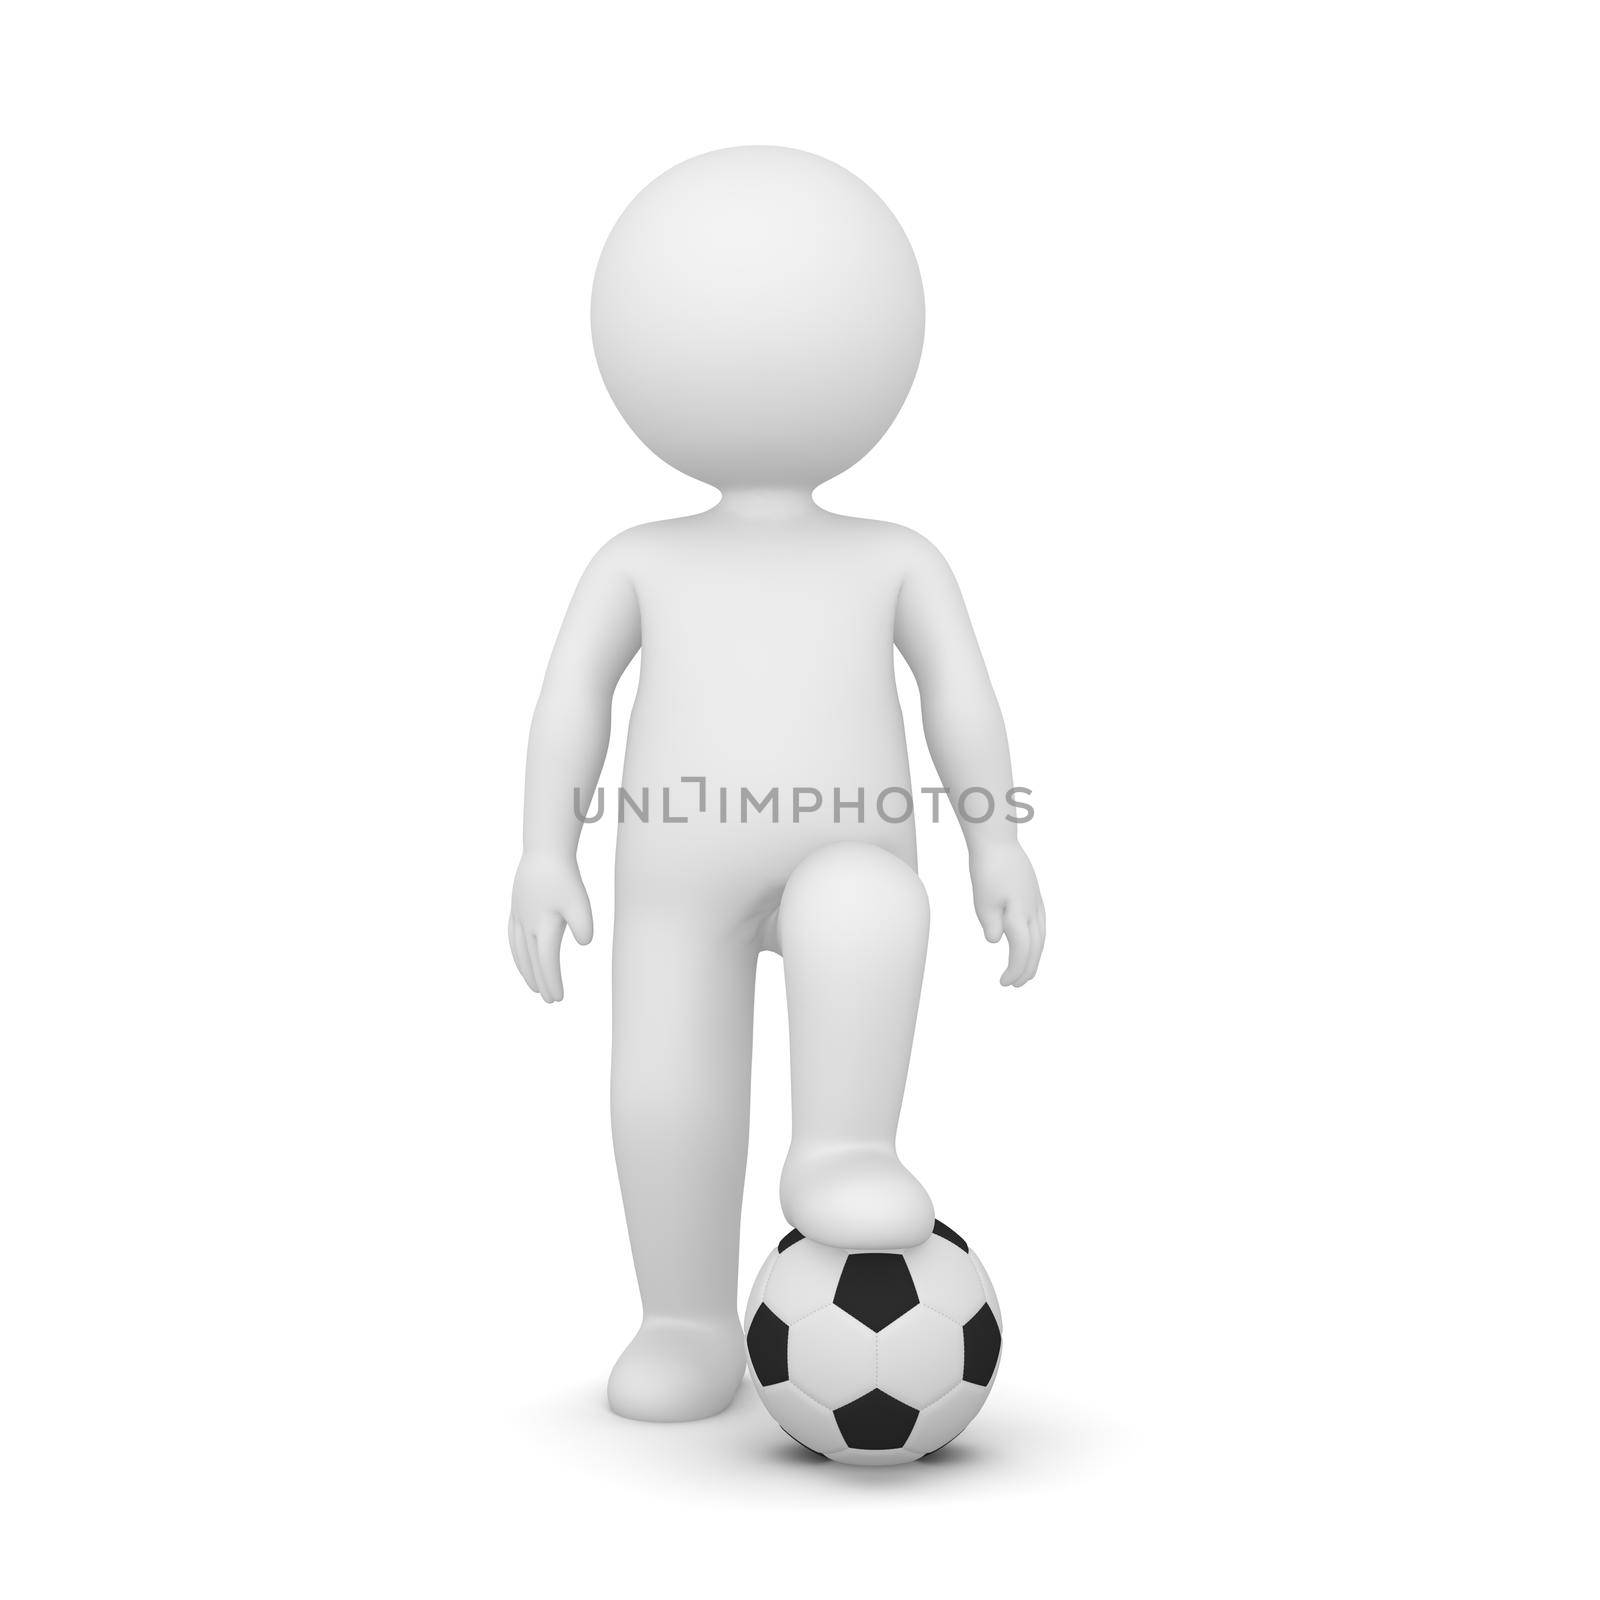 3D Rendering of a man standing with one foot on a soccer ball on white background